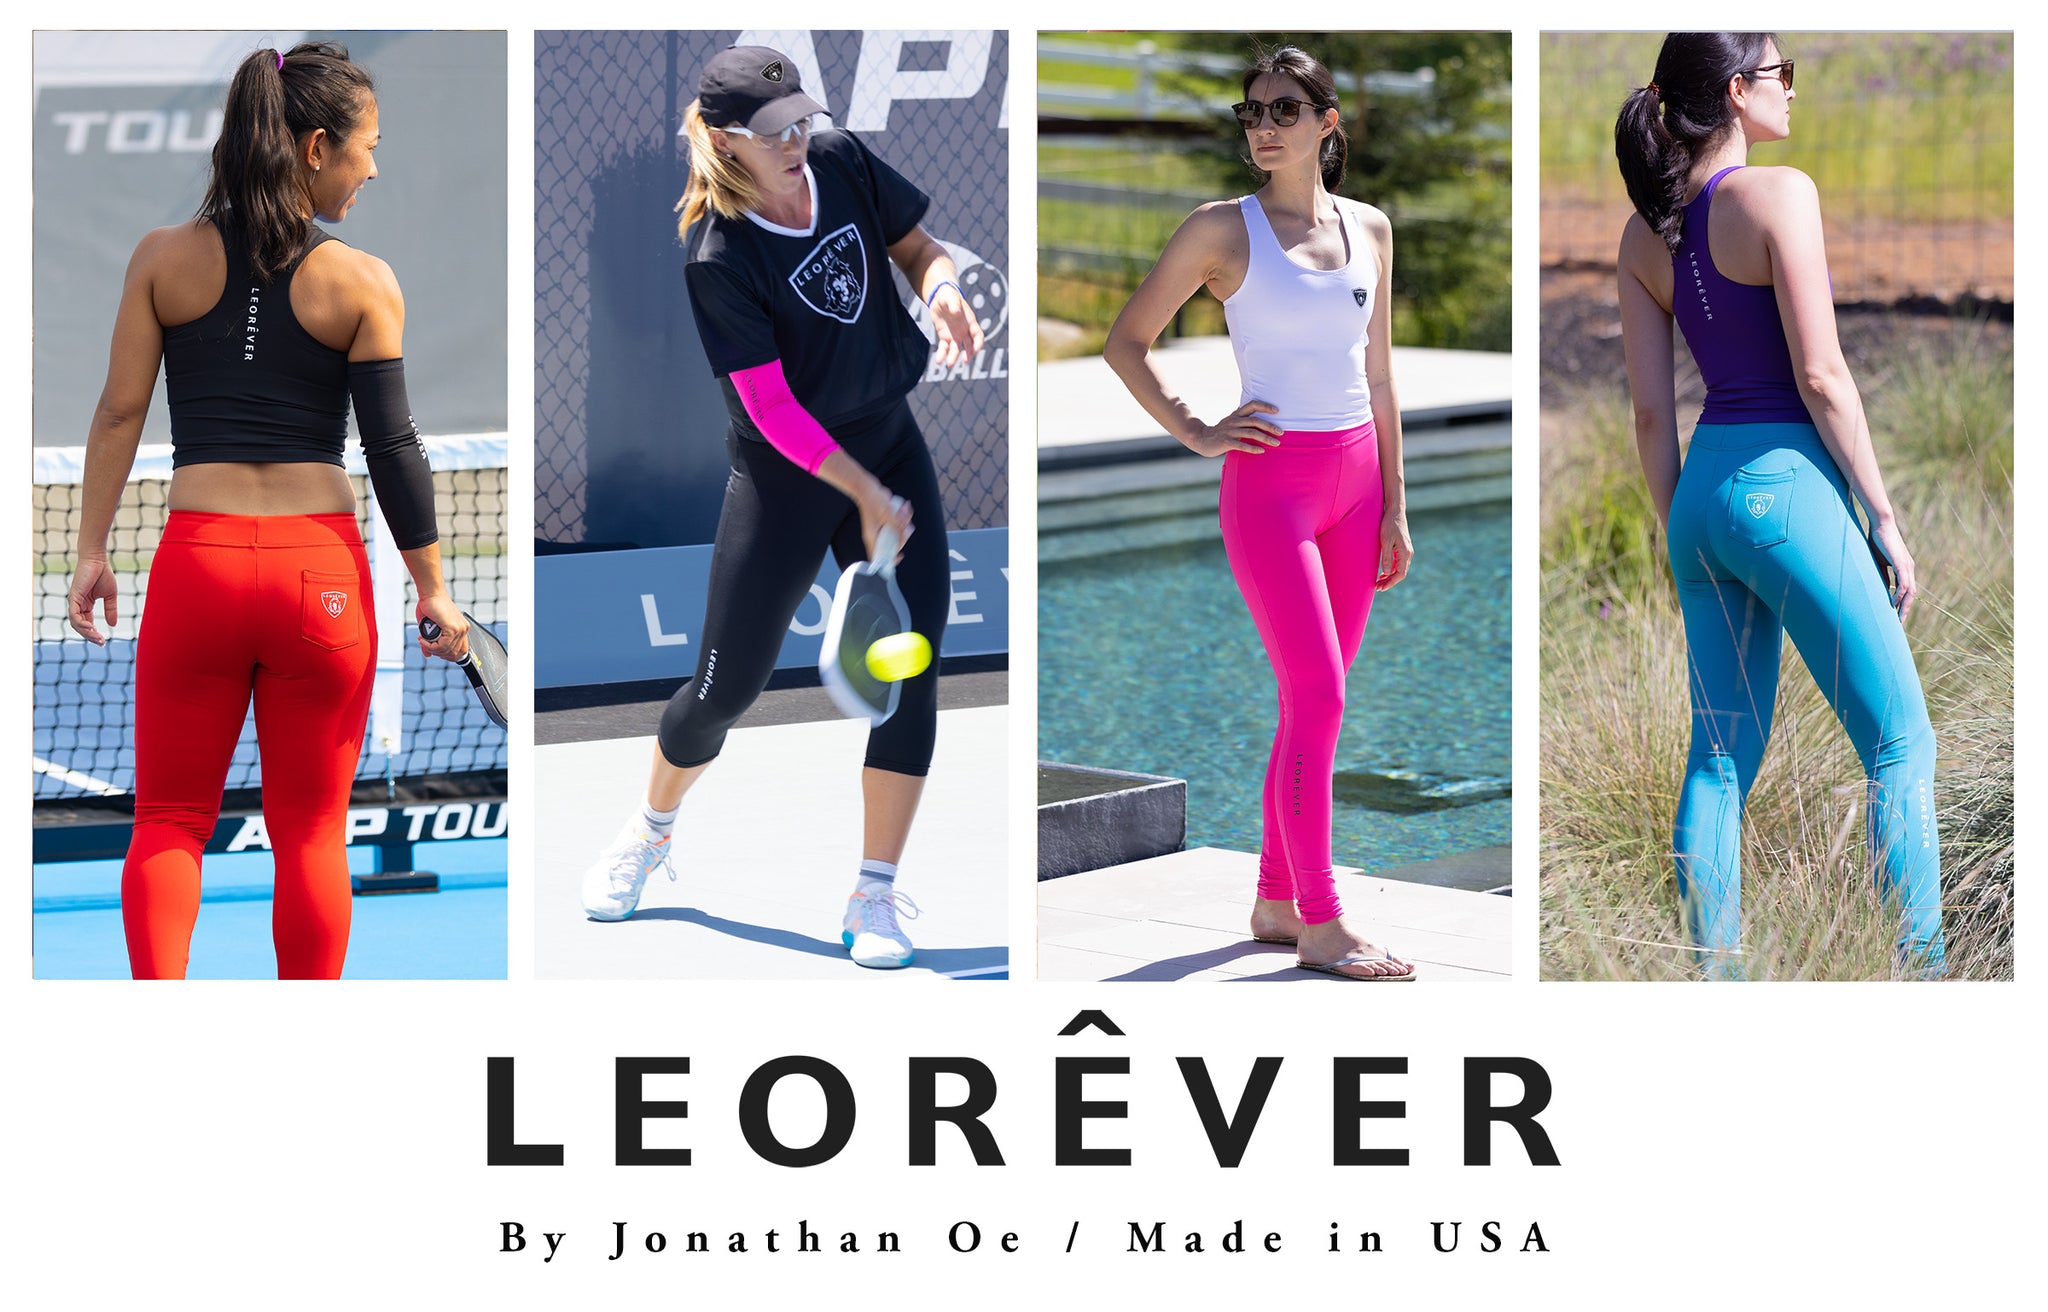 Women's Compression Tights & Pants.